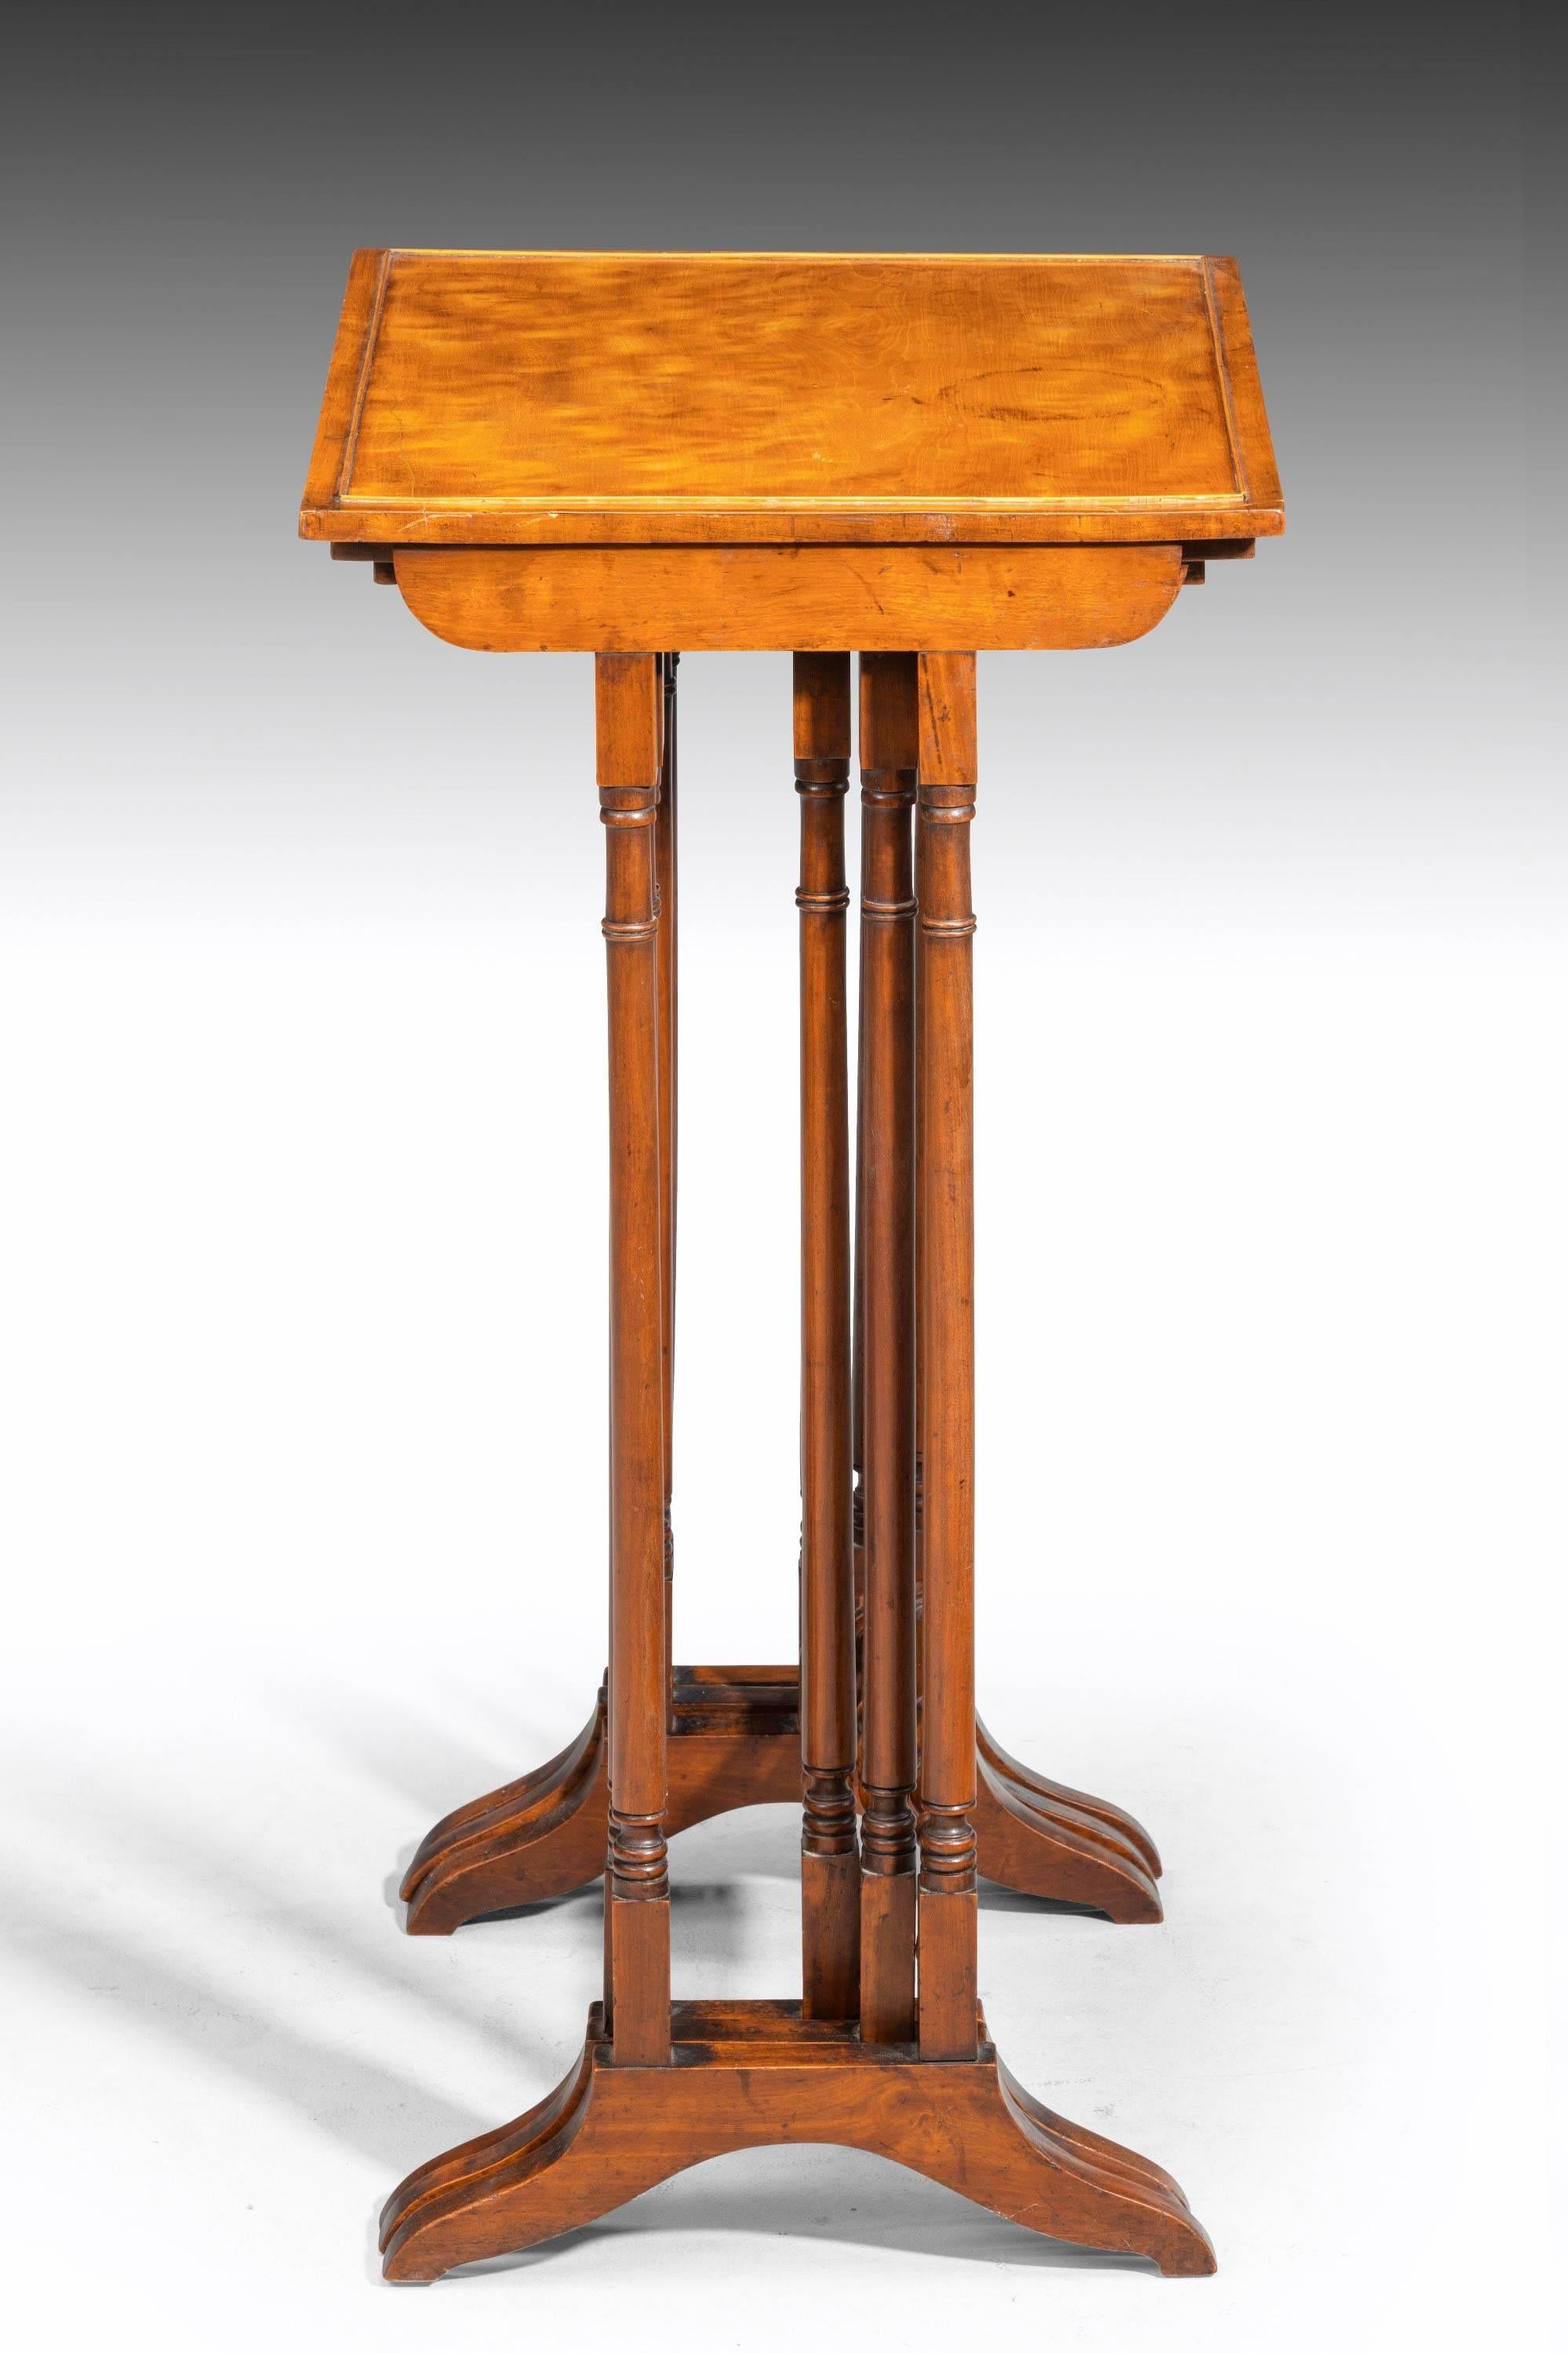 Nest of Regency Mahogany Tables In Excellent Condition In Peterborough, Northamptonshire